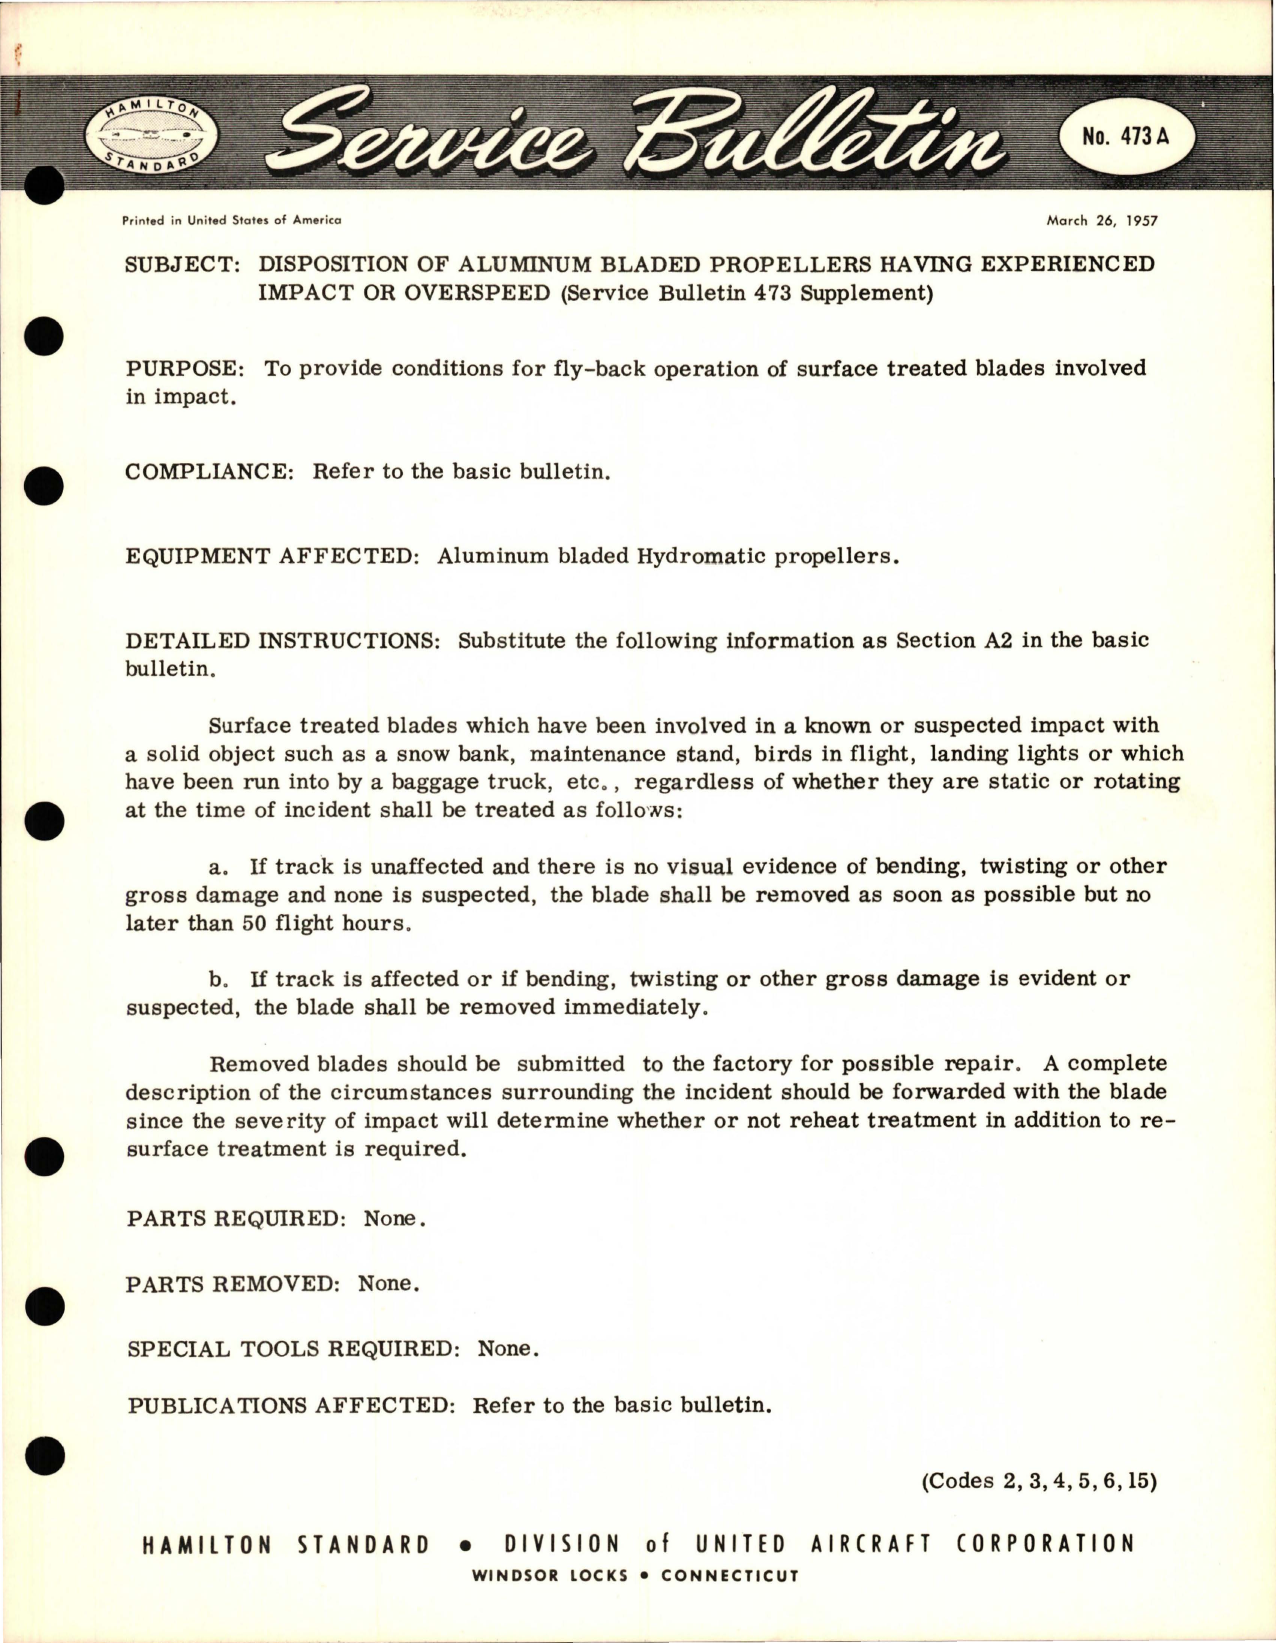 Sample page 1 from AirCorps Library document: Disposition of Aluminum Bladed Propellers having Experienced Impact or Overspeed